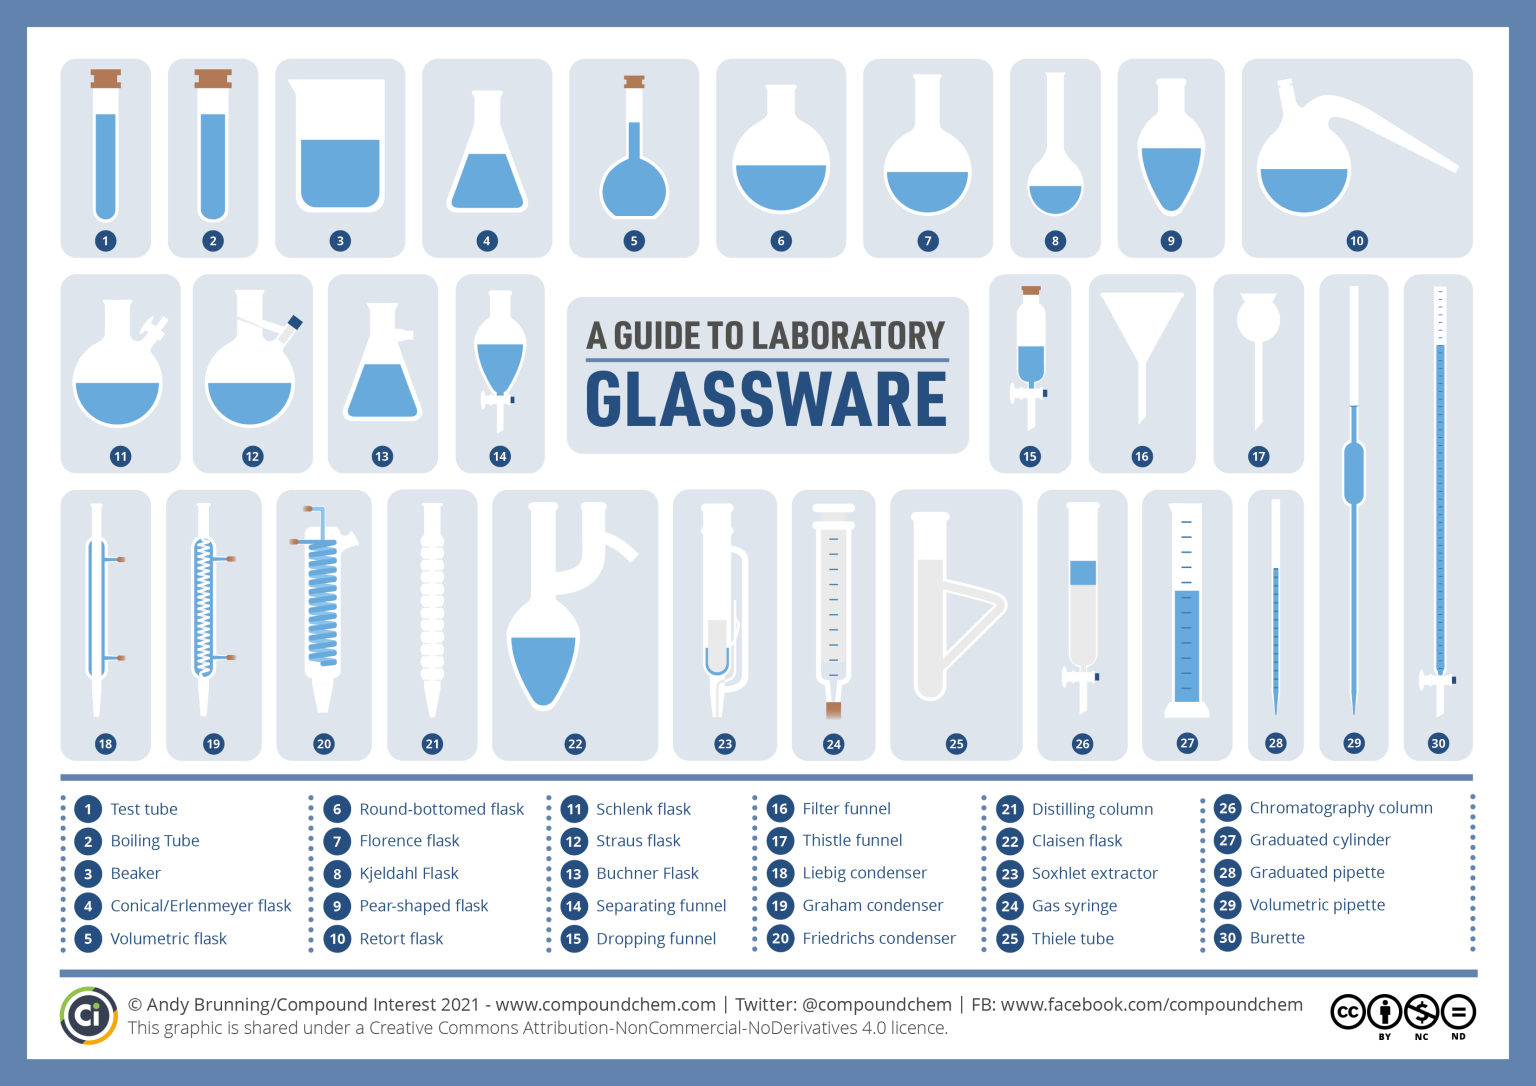 a large image showing many different types and shapes of laboratory glassware